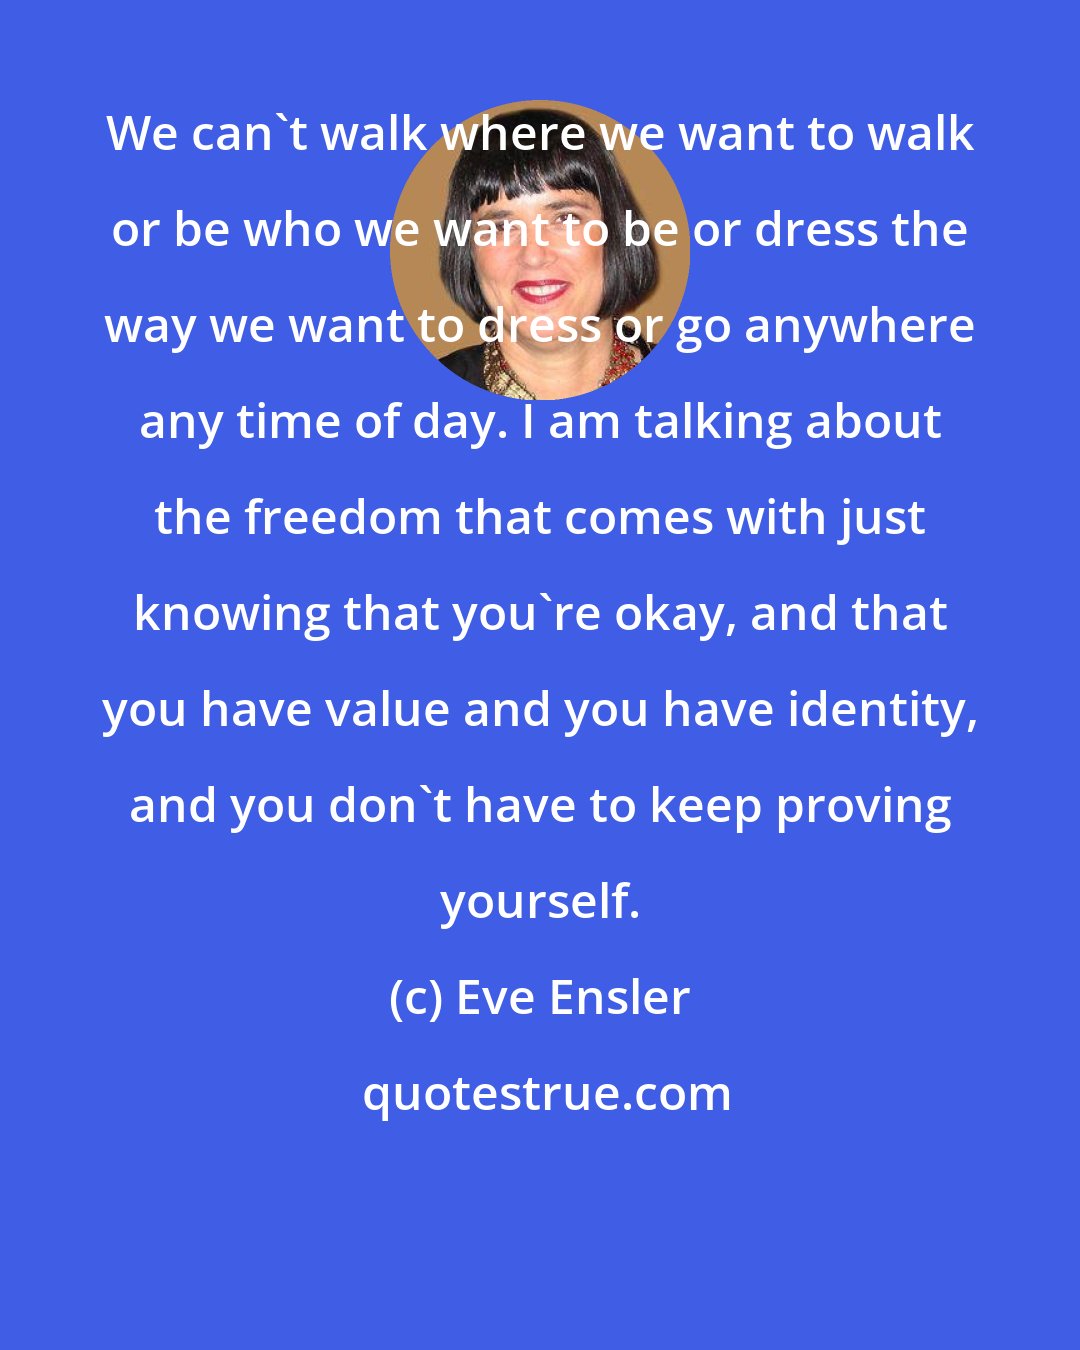 Eve Ensler: We can't walk where we want to walk or be who we want to be or dress the way we want to dress or go anywhere any time of day. I am talking about the freedom that comes with just knowing that you're okay, and that you have value and you have identity, and you don't have to keep proving yourself.